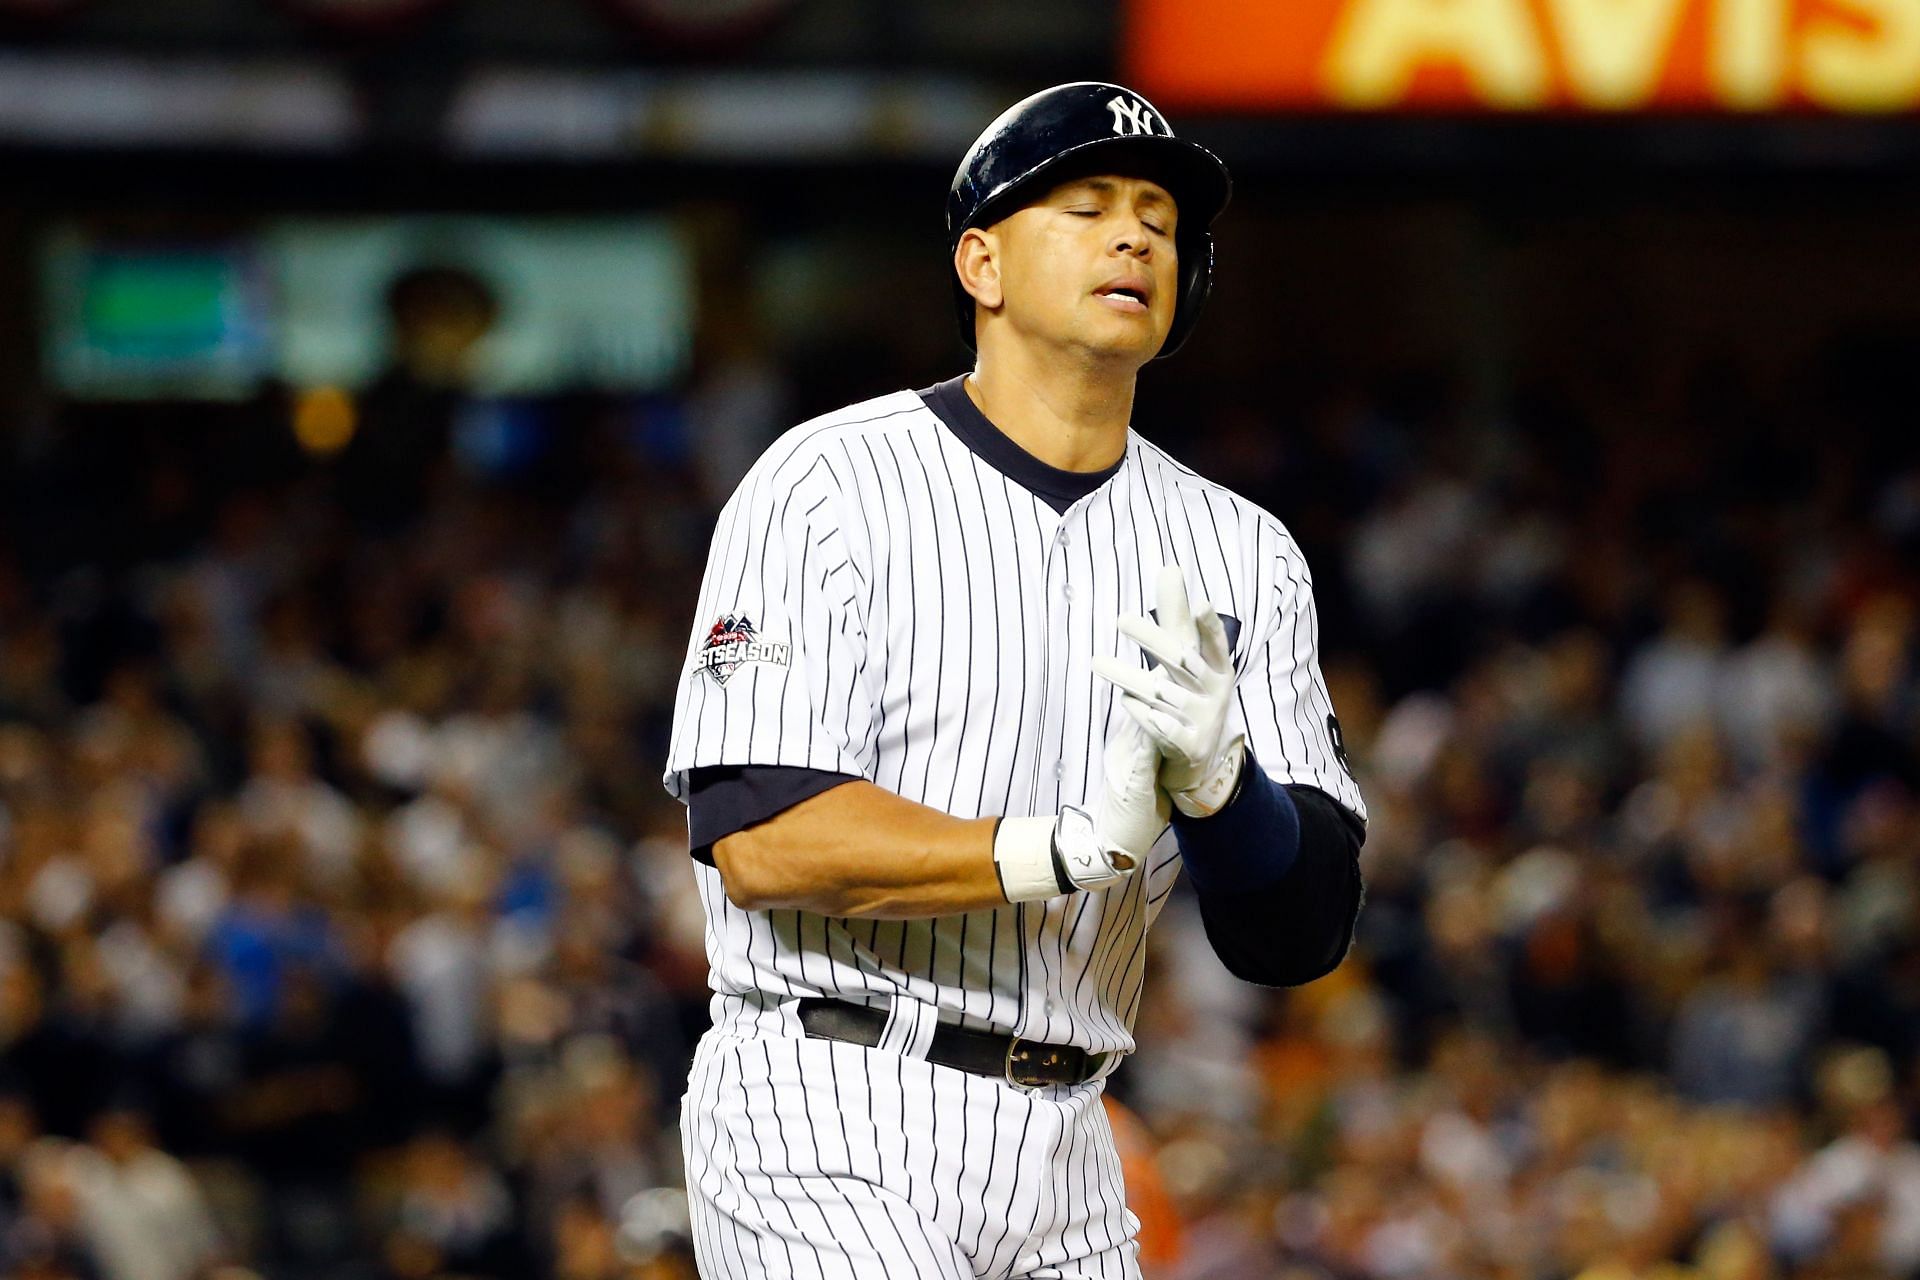 Alex Rodriguez rues involvement in infamous PED scandal: 